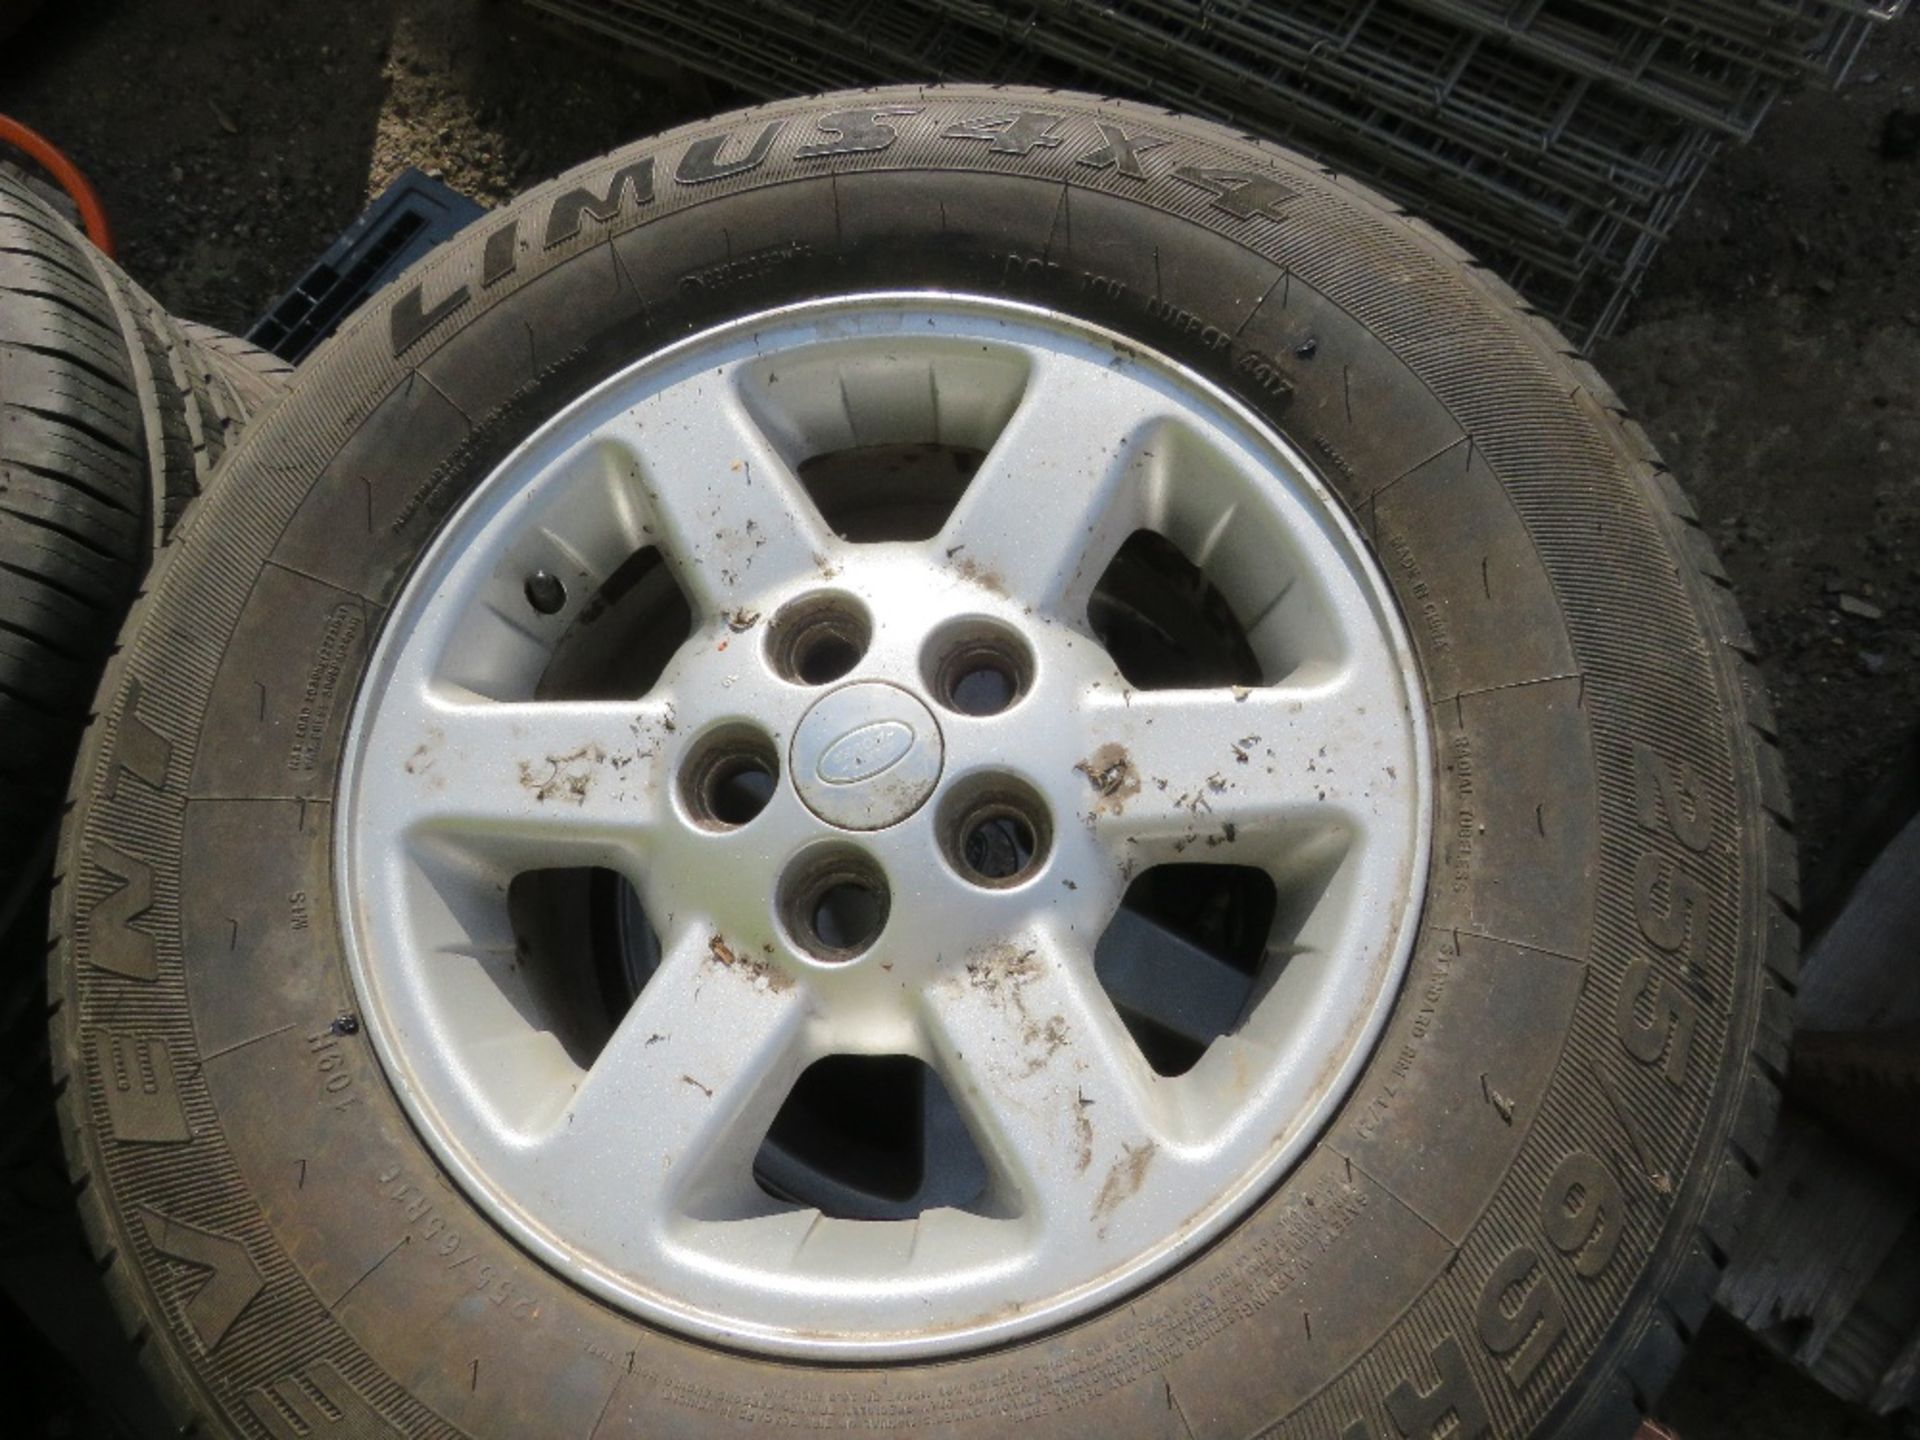 4 X LANDROVER 255-65R16 ALLOY WHEELS AND TYRES PLUS 2 OTHER 16" TYRES. THIS LOT IS SOLD UNDER THE - Image 5 of 7